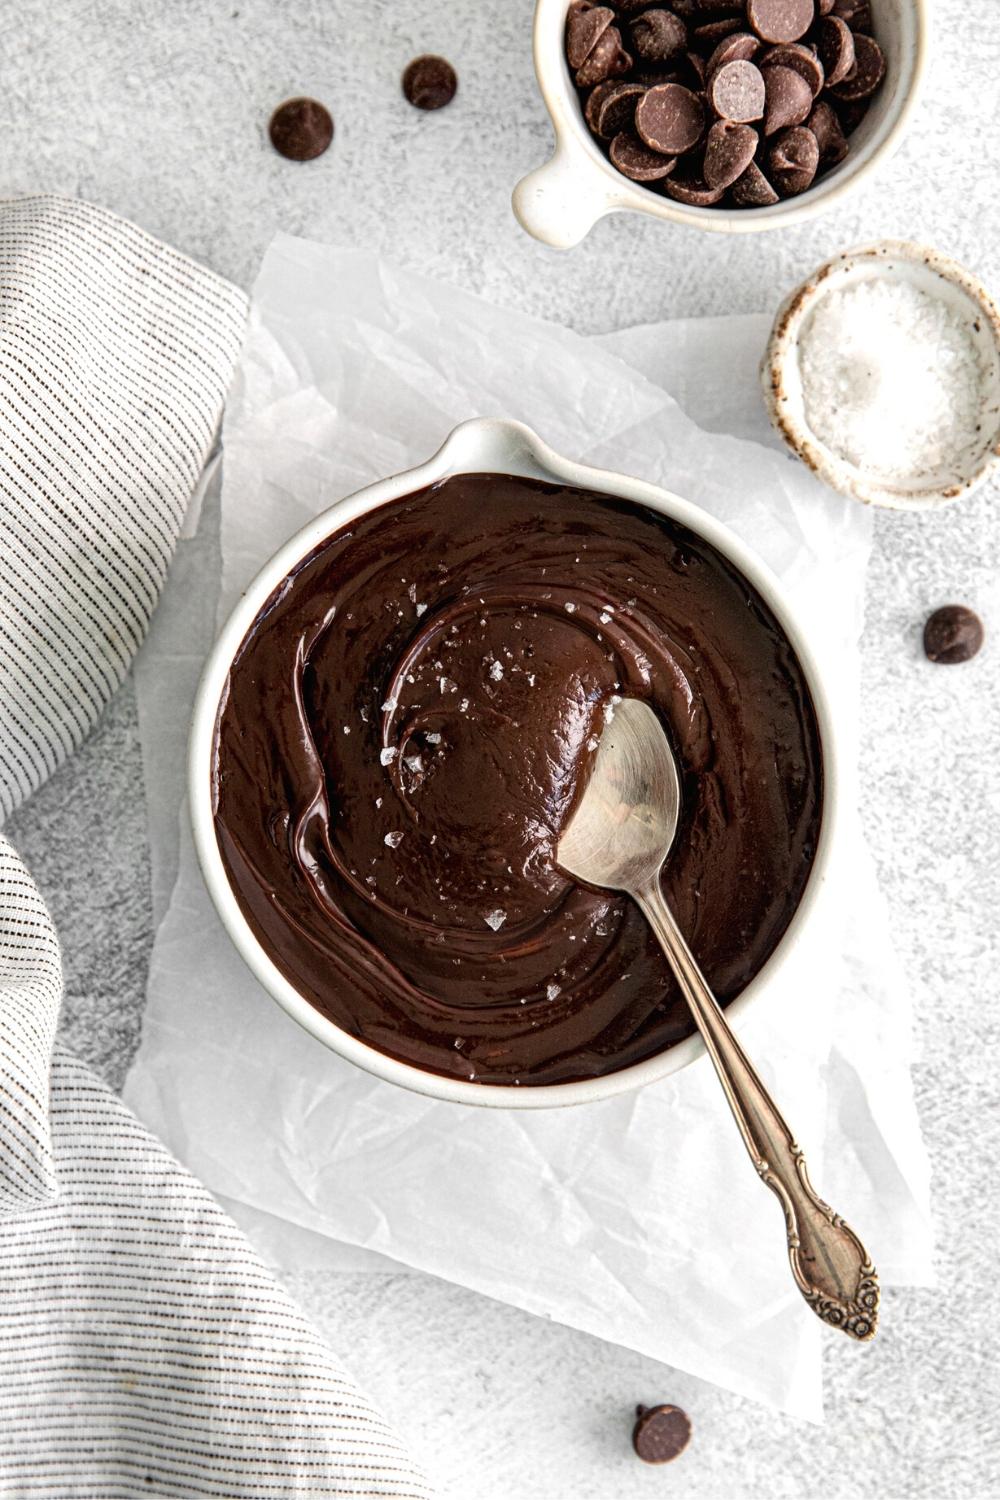 Homemade hot fudge sauce in a small bowl garnished with a pinch of flaky sea salt.